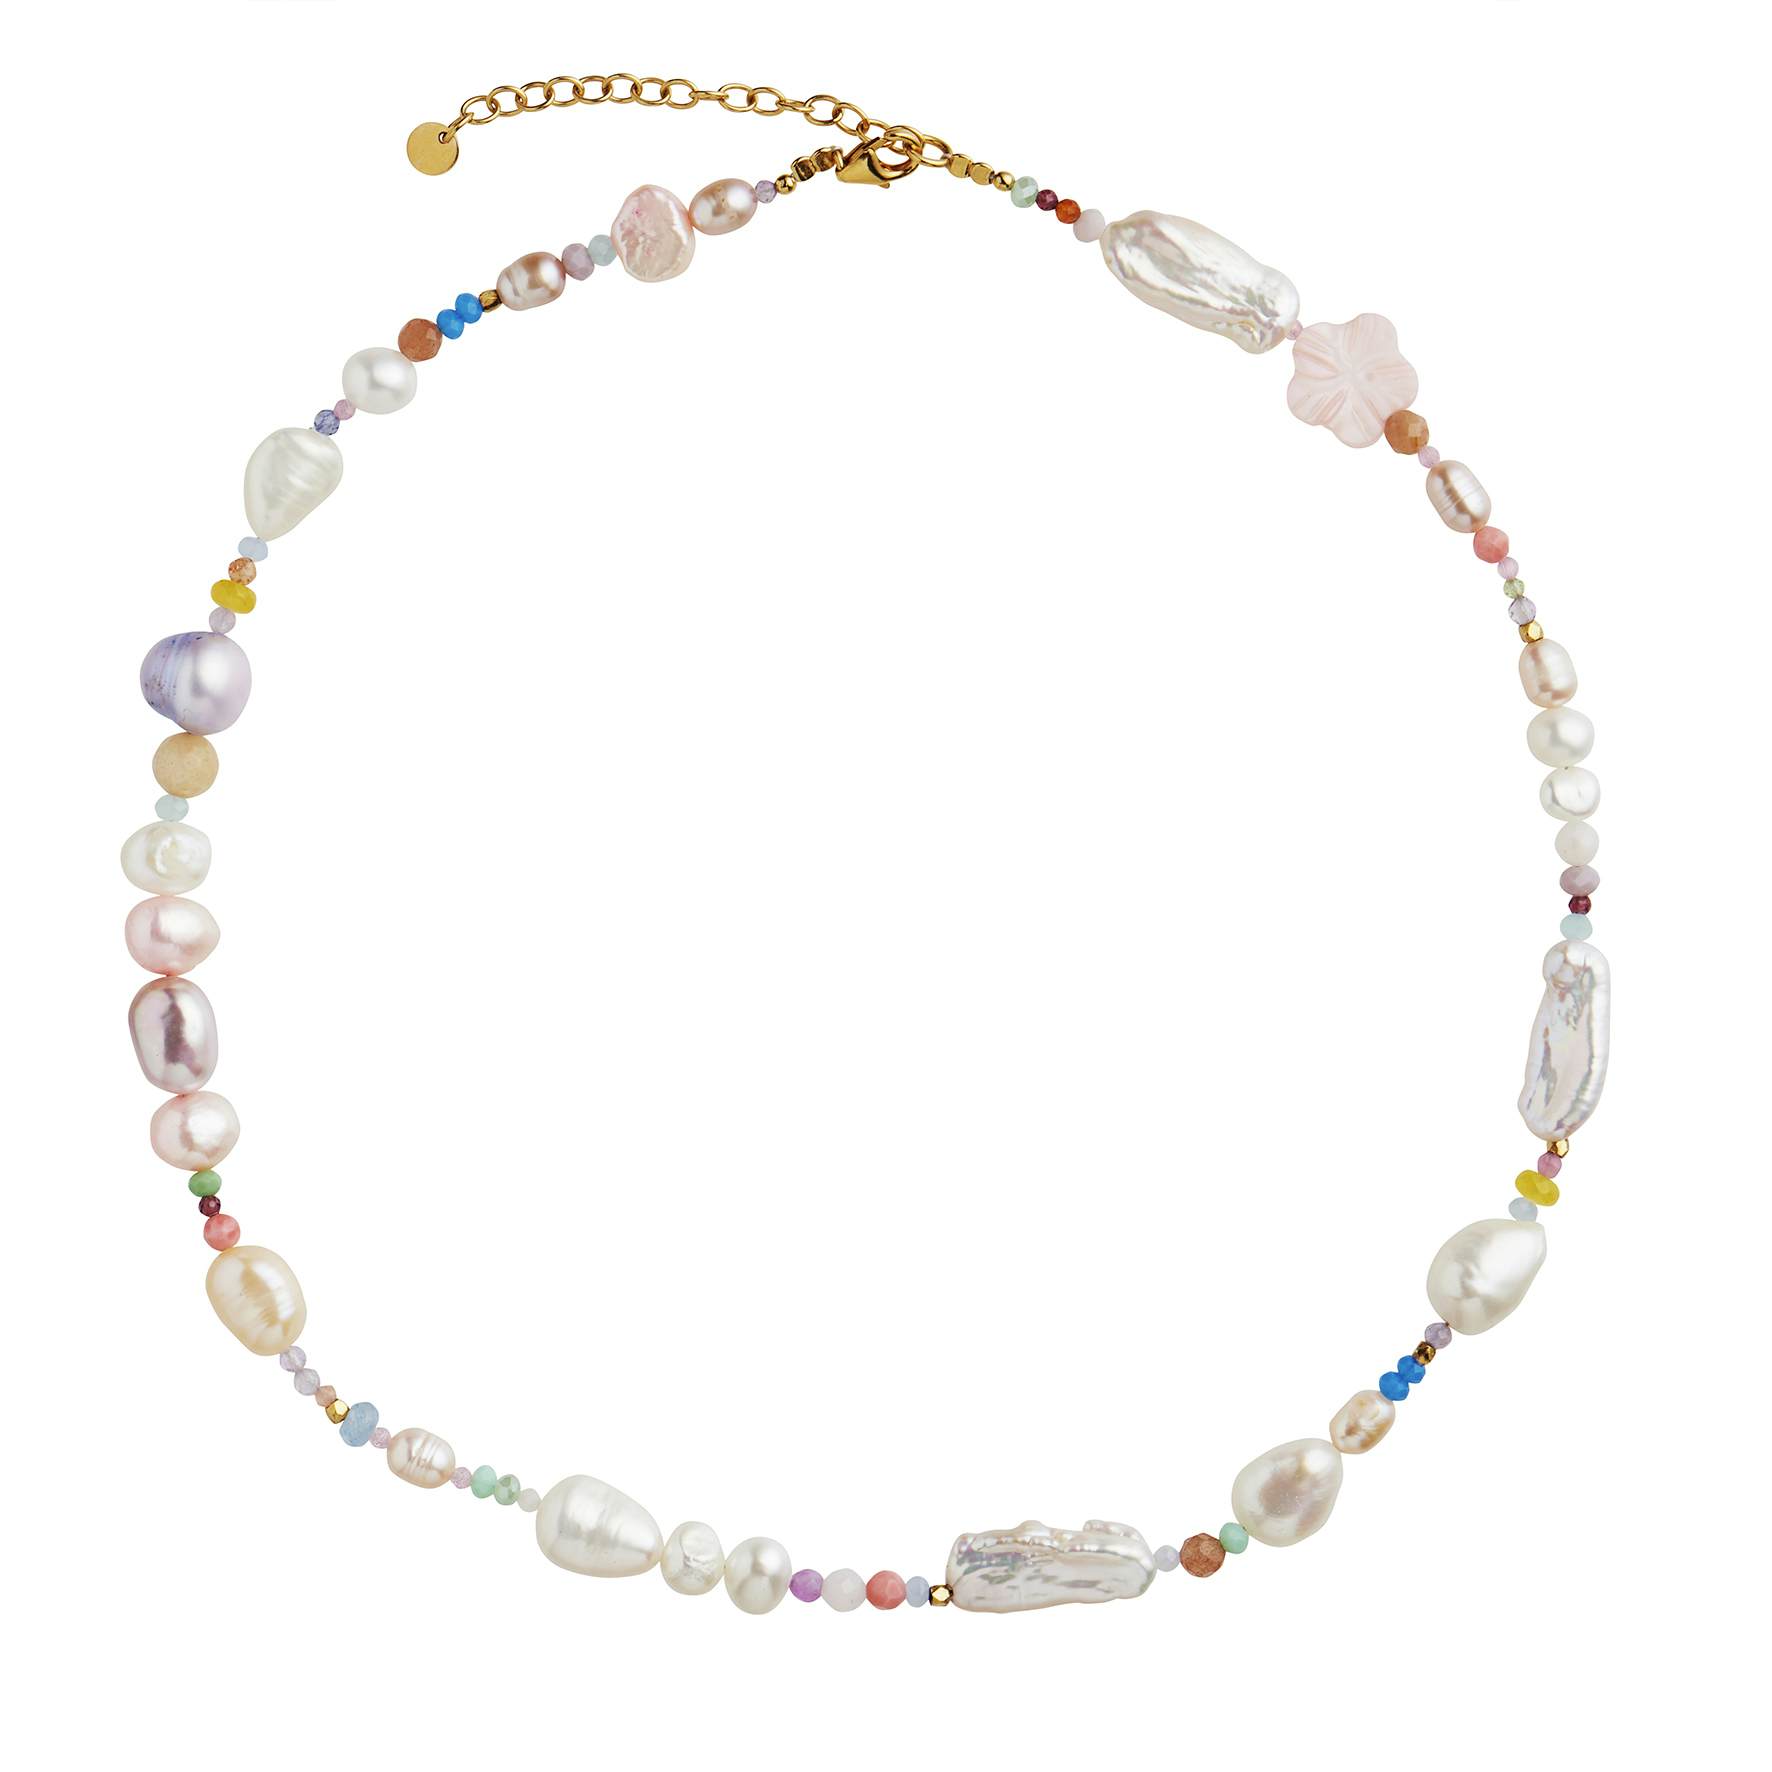 Cherry Garden Necklace - Pale Pastel Mix from STINE A Jewelry in Goldplated-Silver Sterling 925